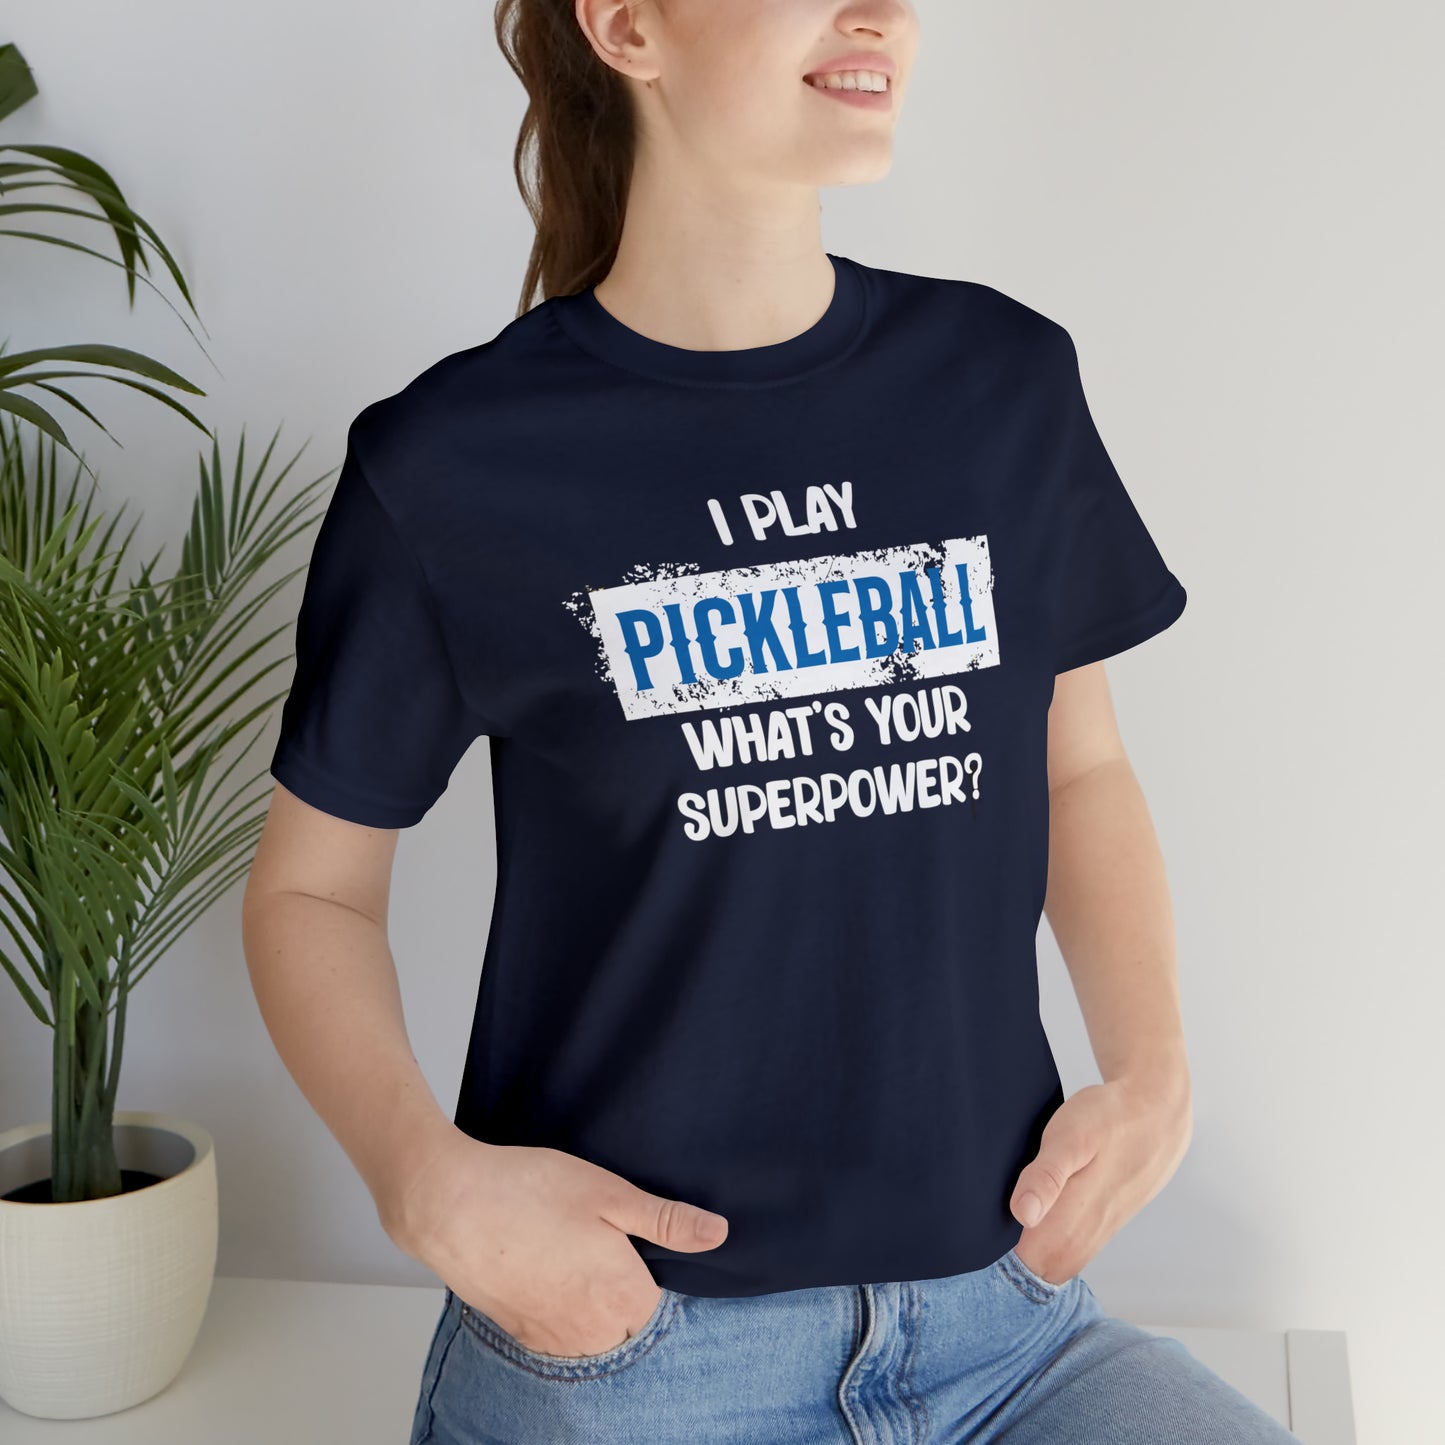 I Play Pickleball, What’s Your Superpower - T-Shirt